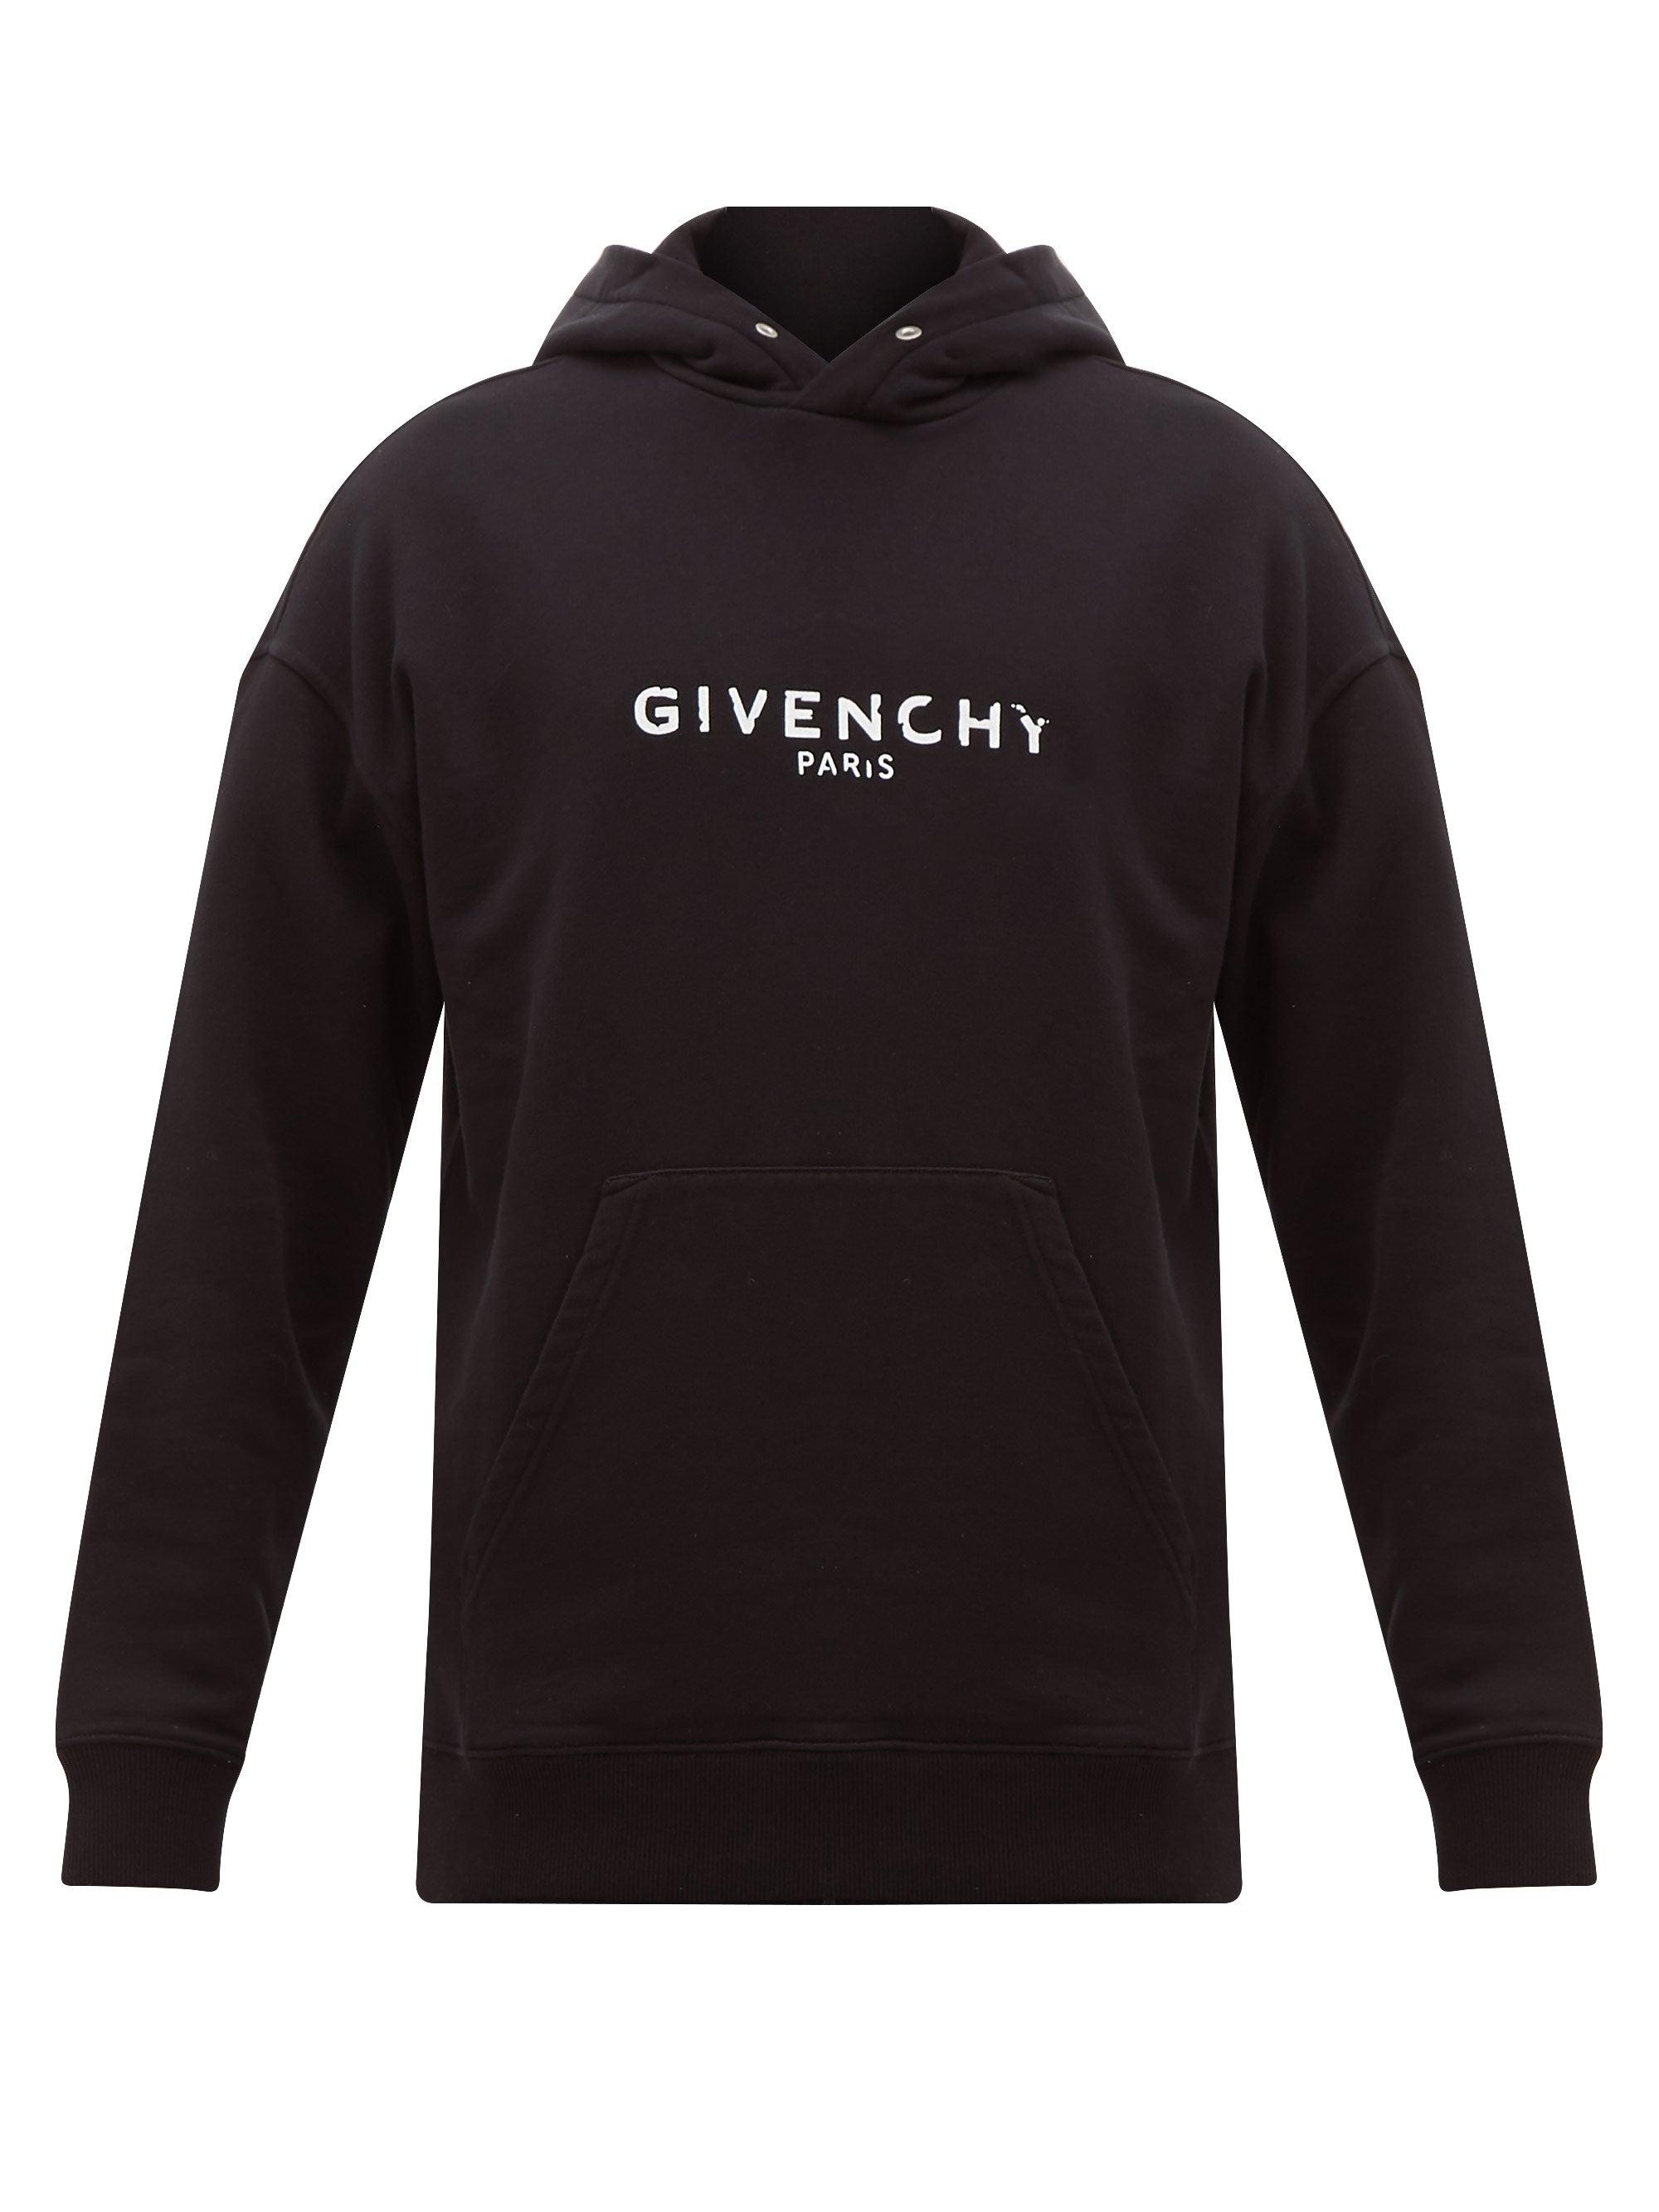 Givenchy Cotton Oversized Faded Logo Hoodie in Black for Men - Save 50% ...